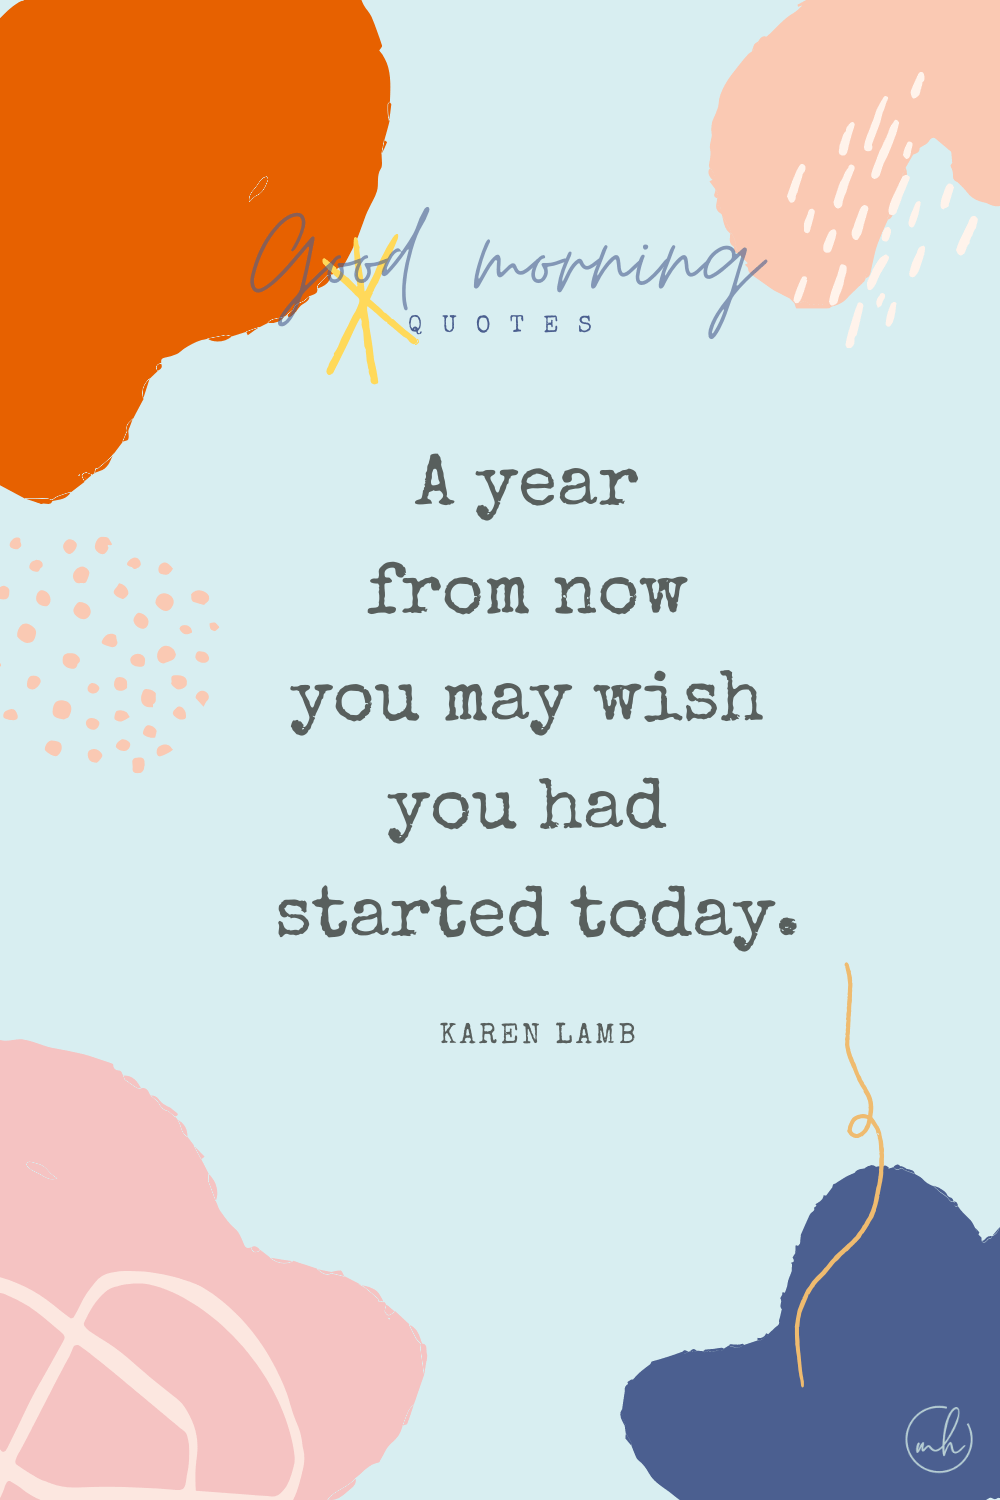 "A year from now you may wish you had started today." — Karen Lamb